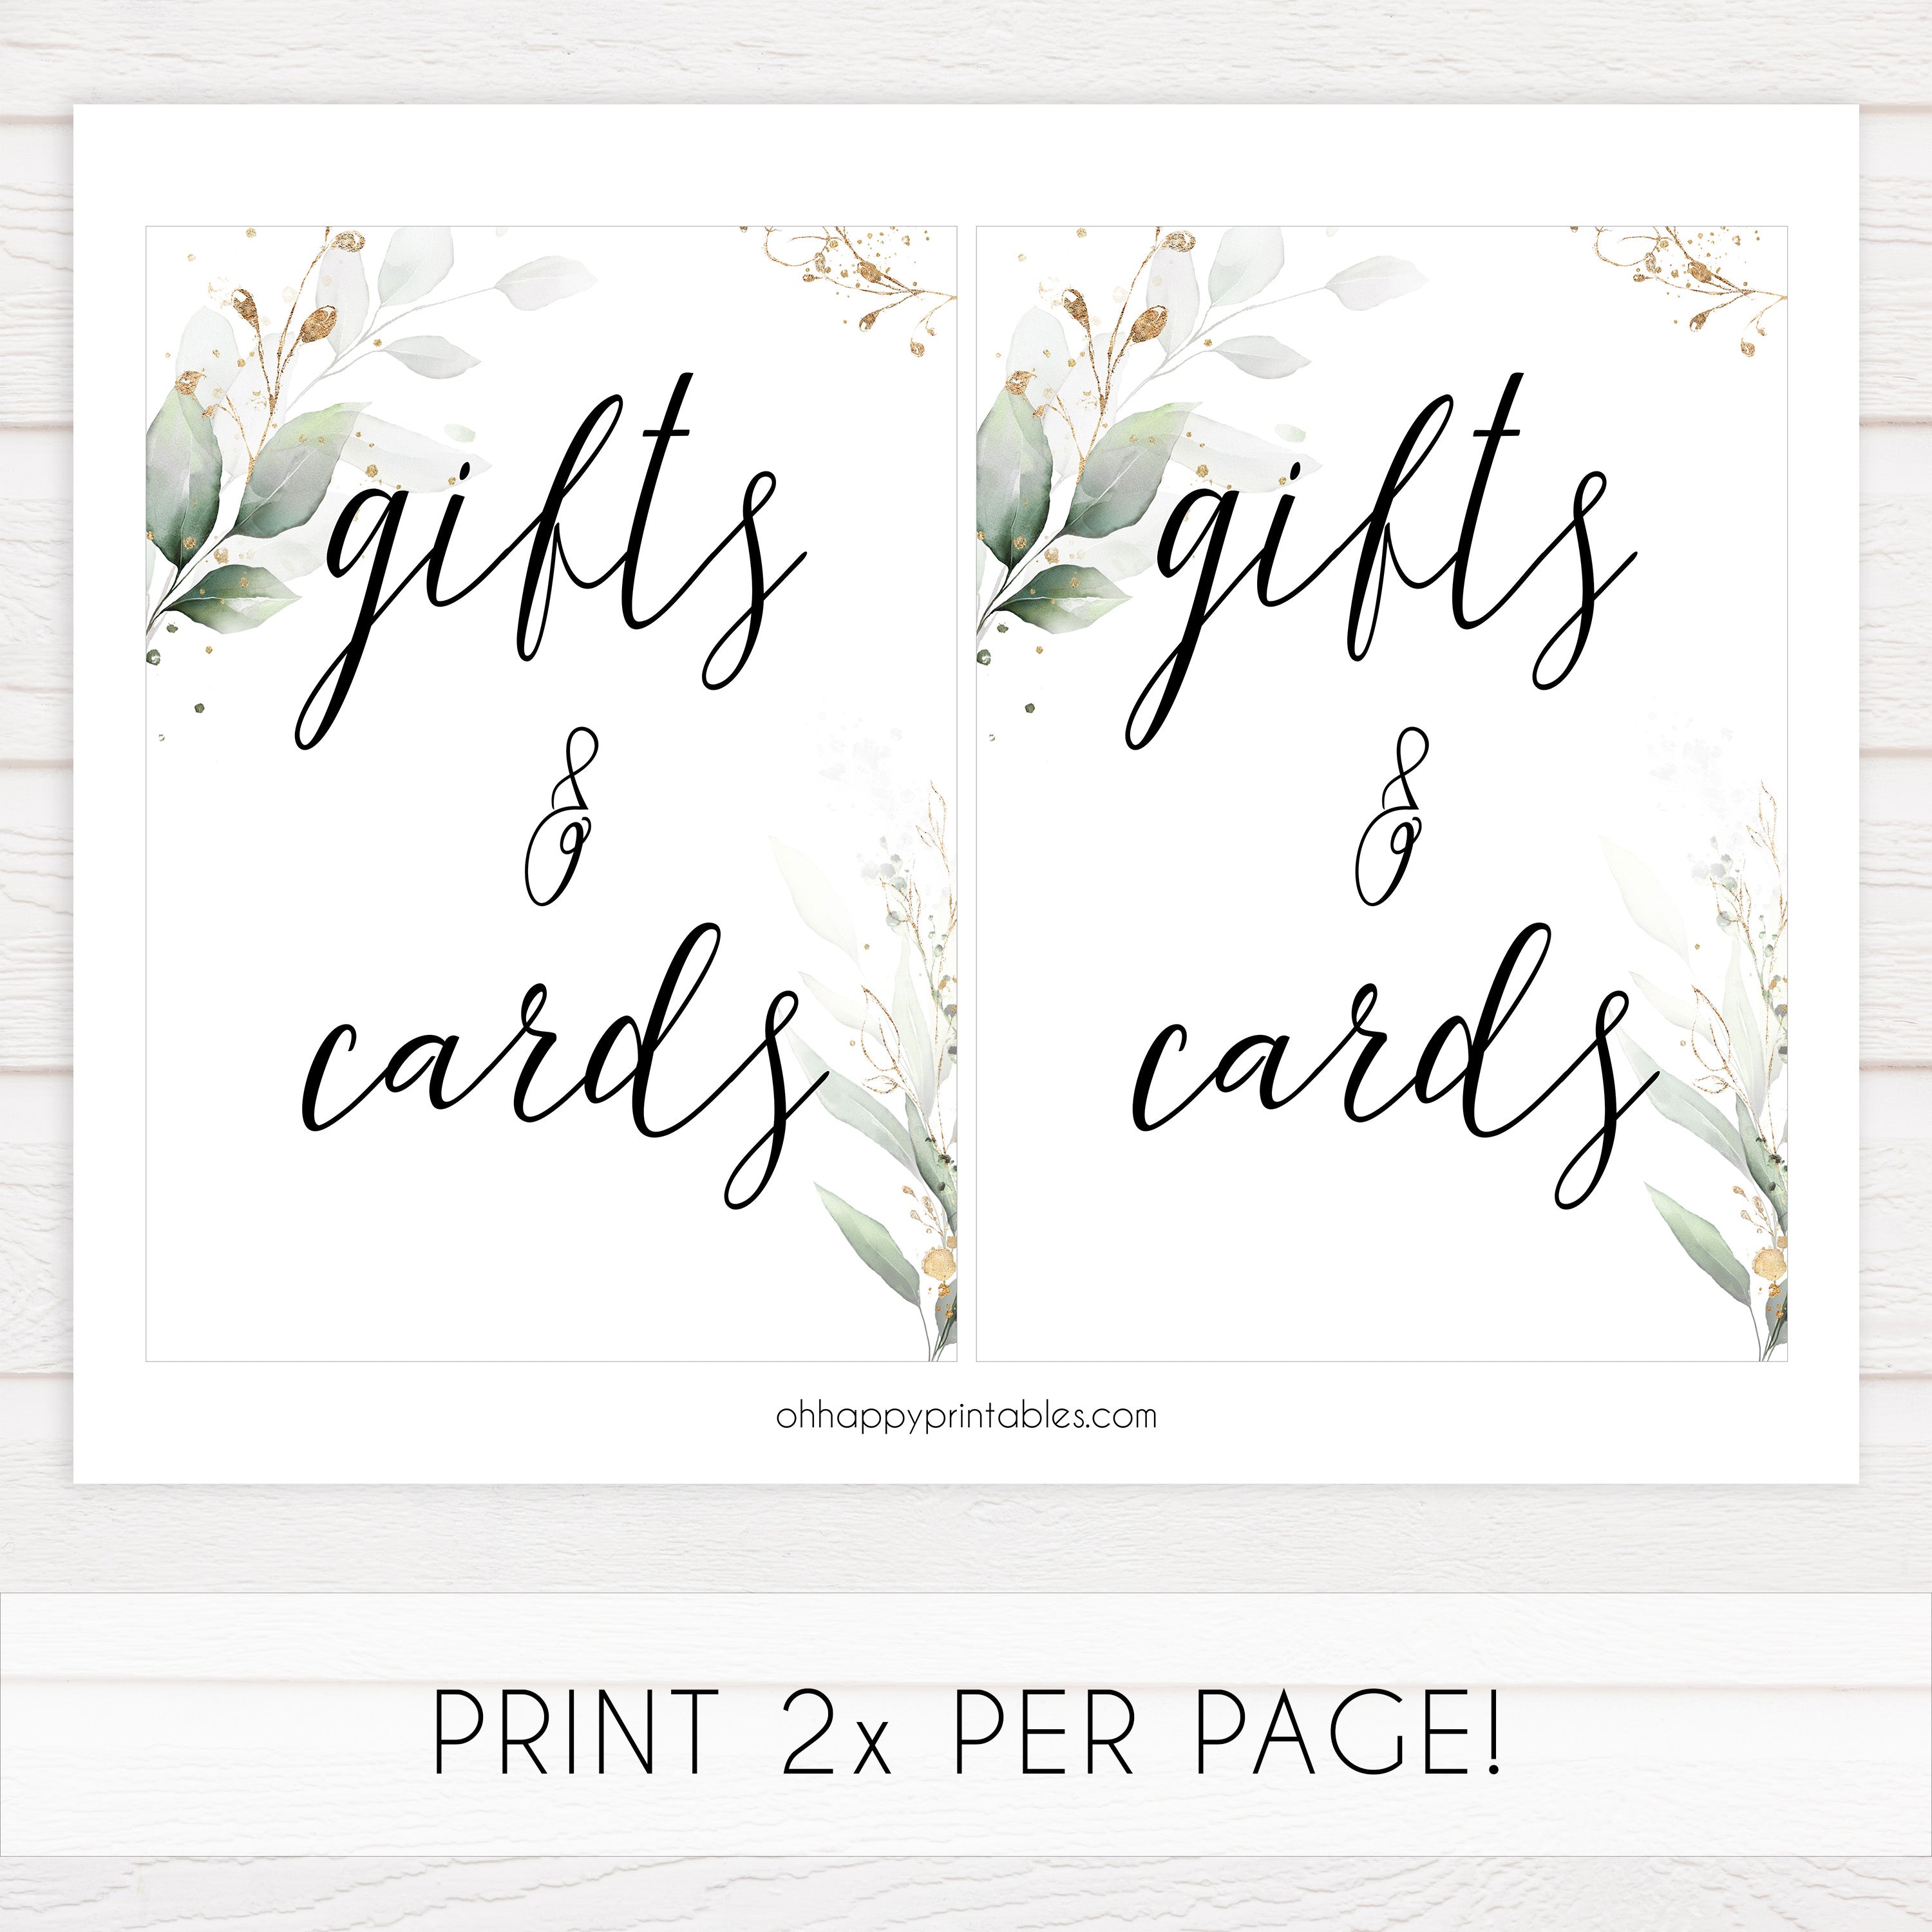 gifts and cards table signs, Printable bridal shower signs, greenery bridal shower decor, gold leaf bridal shower decor ideas, fun bridal shower decor, bridal shower game ideas, greenery bridal shower ideas